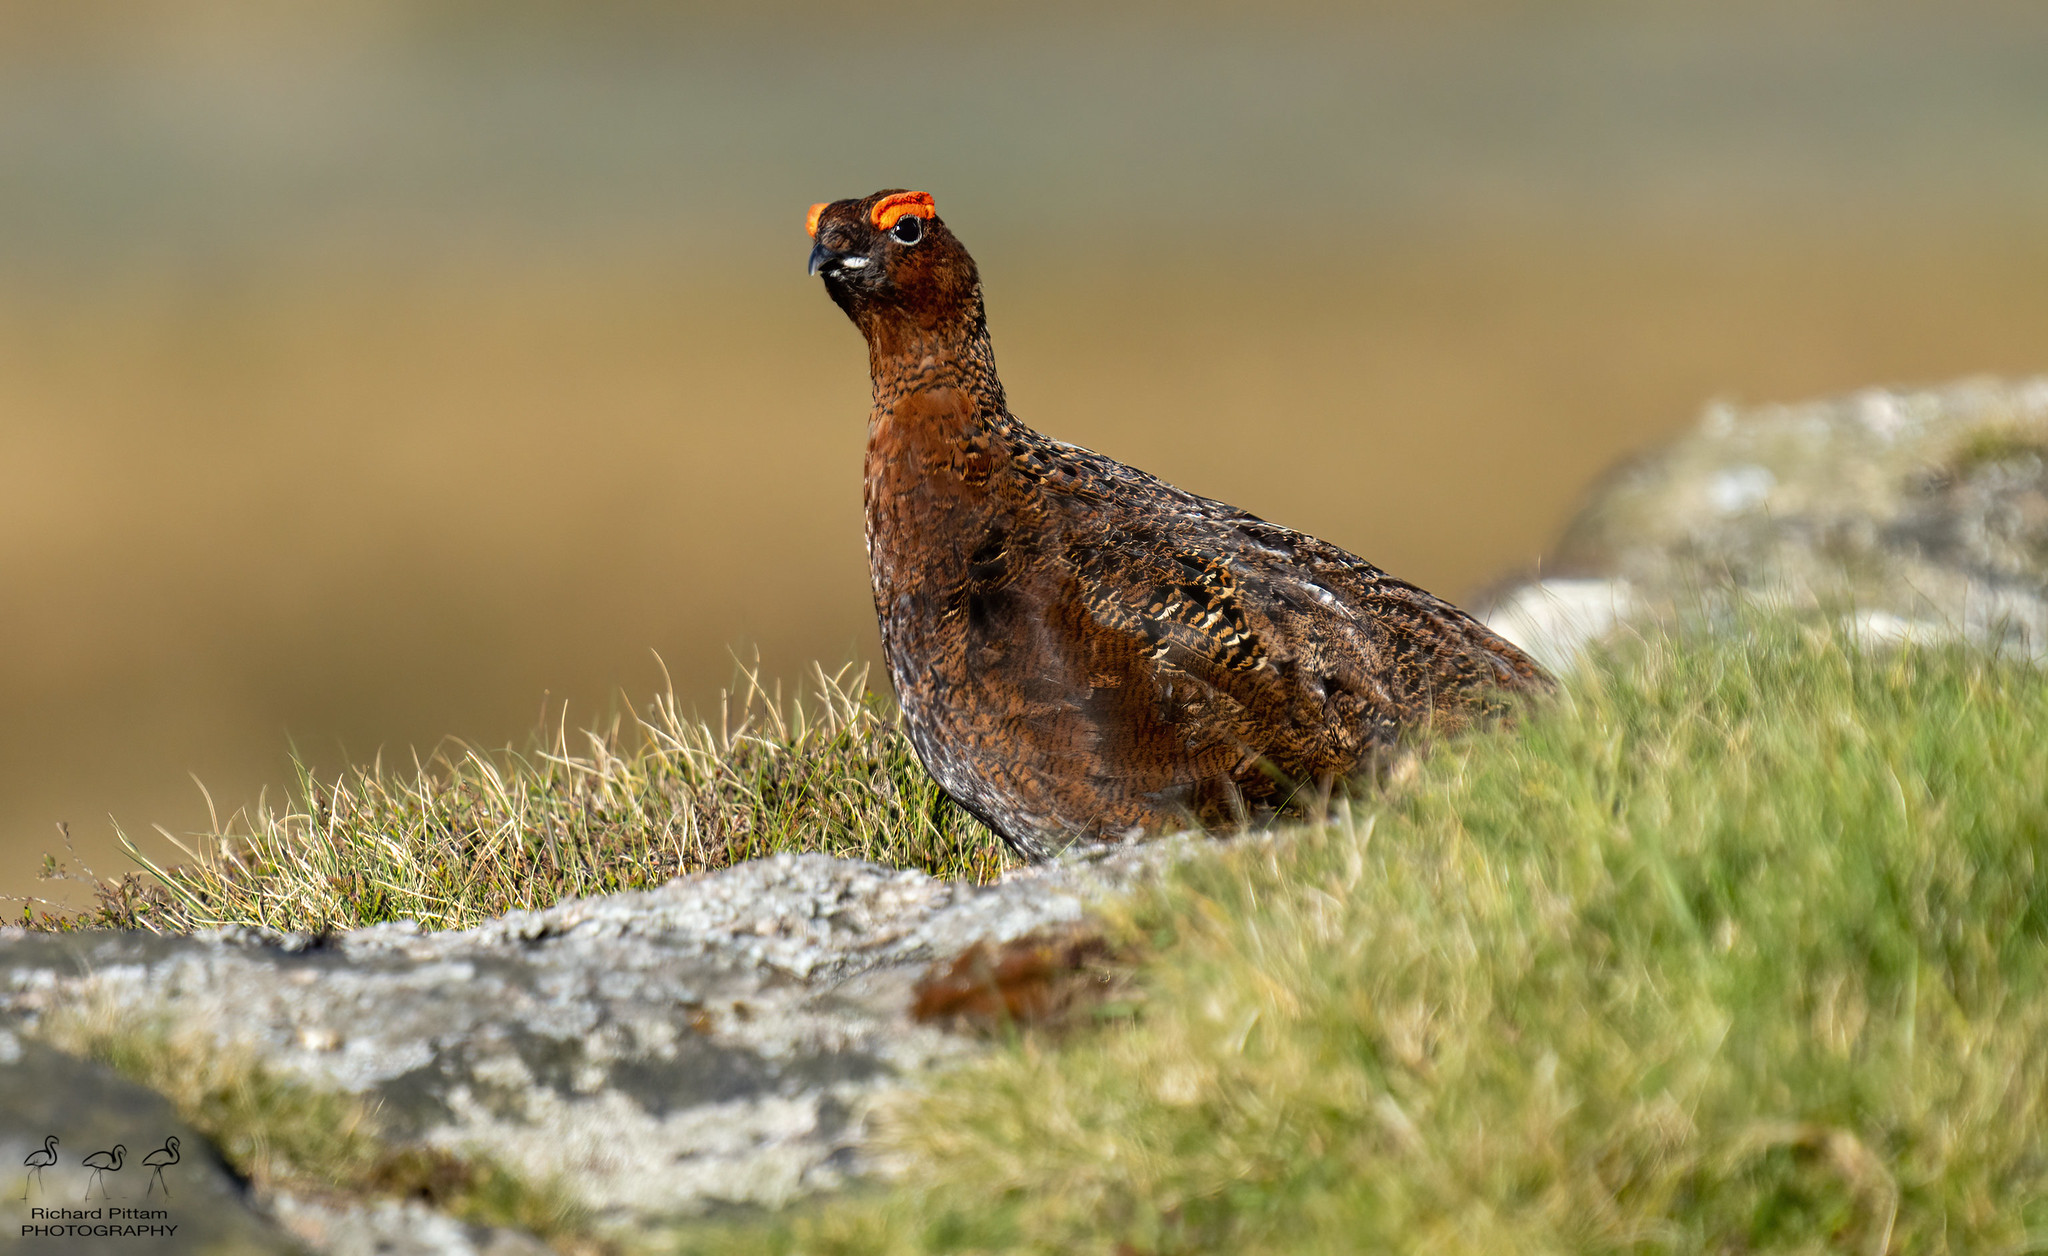 Red Grouse - "What you lookin' at?"